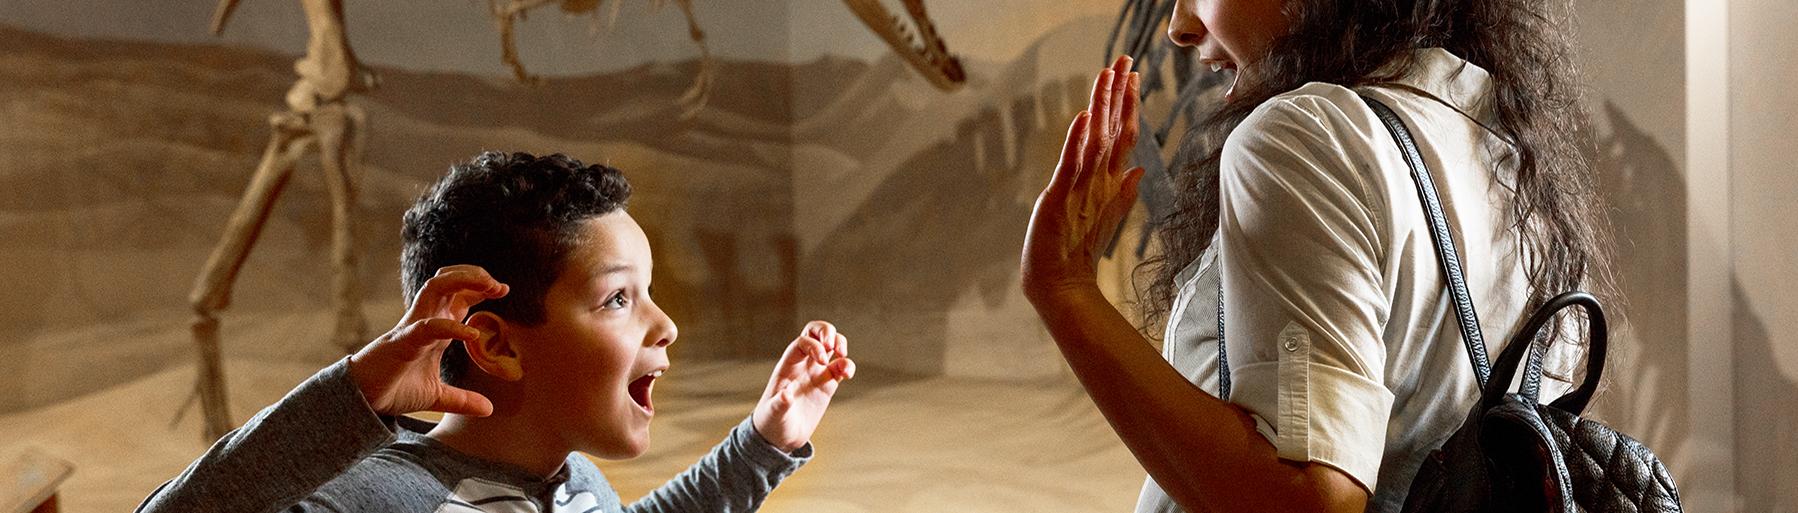 Woman and young boy stand in front of dinosaur skeleton as the boy makes a 'Rawr' face with hands up like dinosaur claws in the direction of the woman